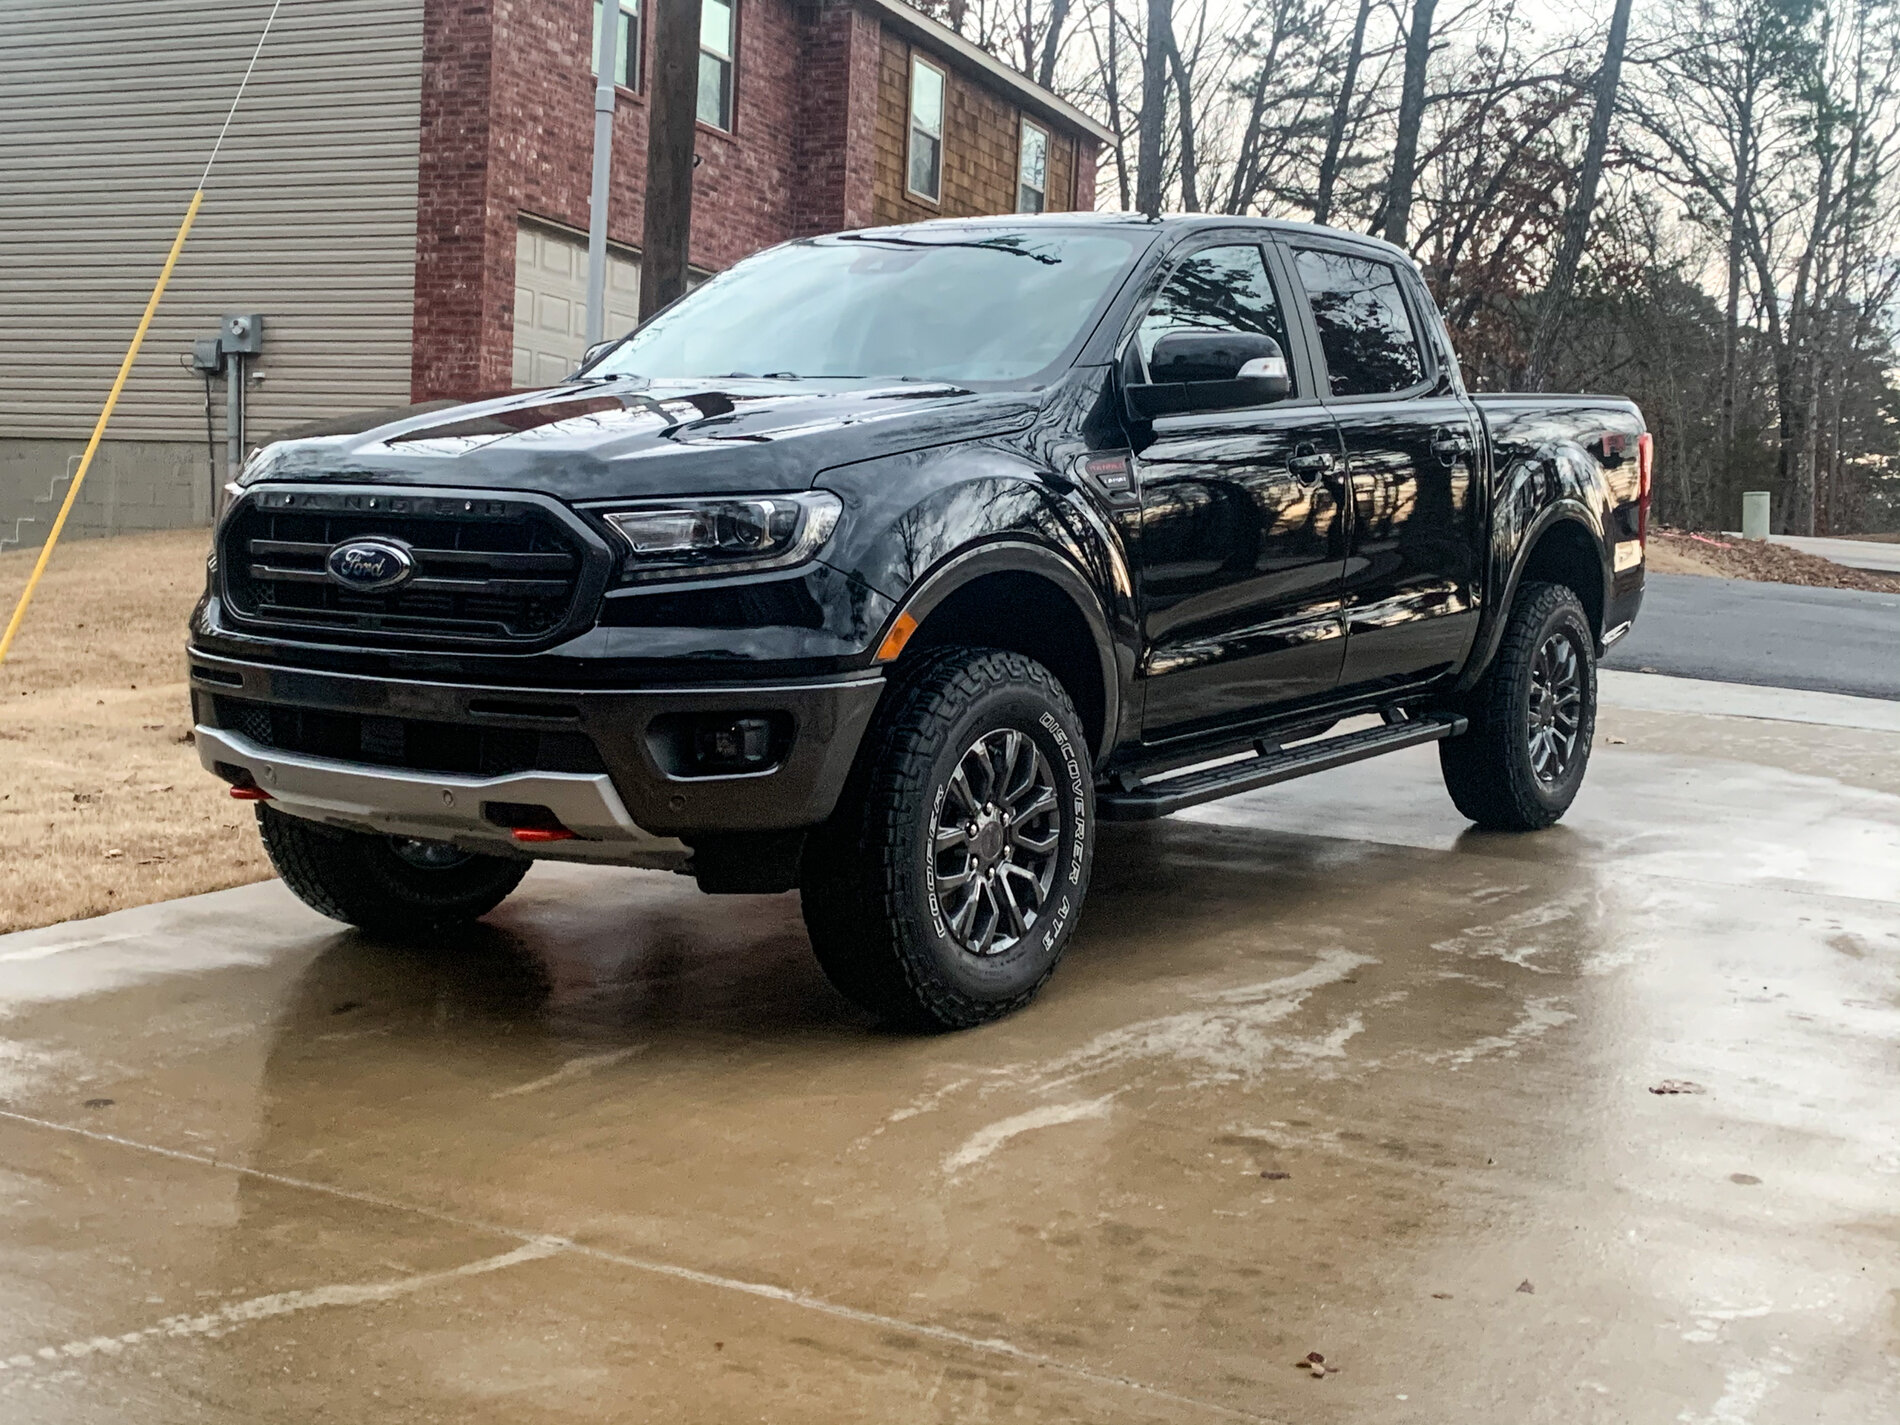 Pics of 265/70/17 tire | Page 9 | 2019+ Ford Ranger and Raptor Forum ...